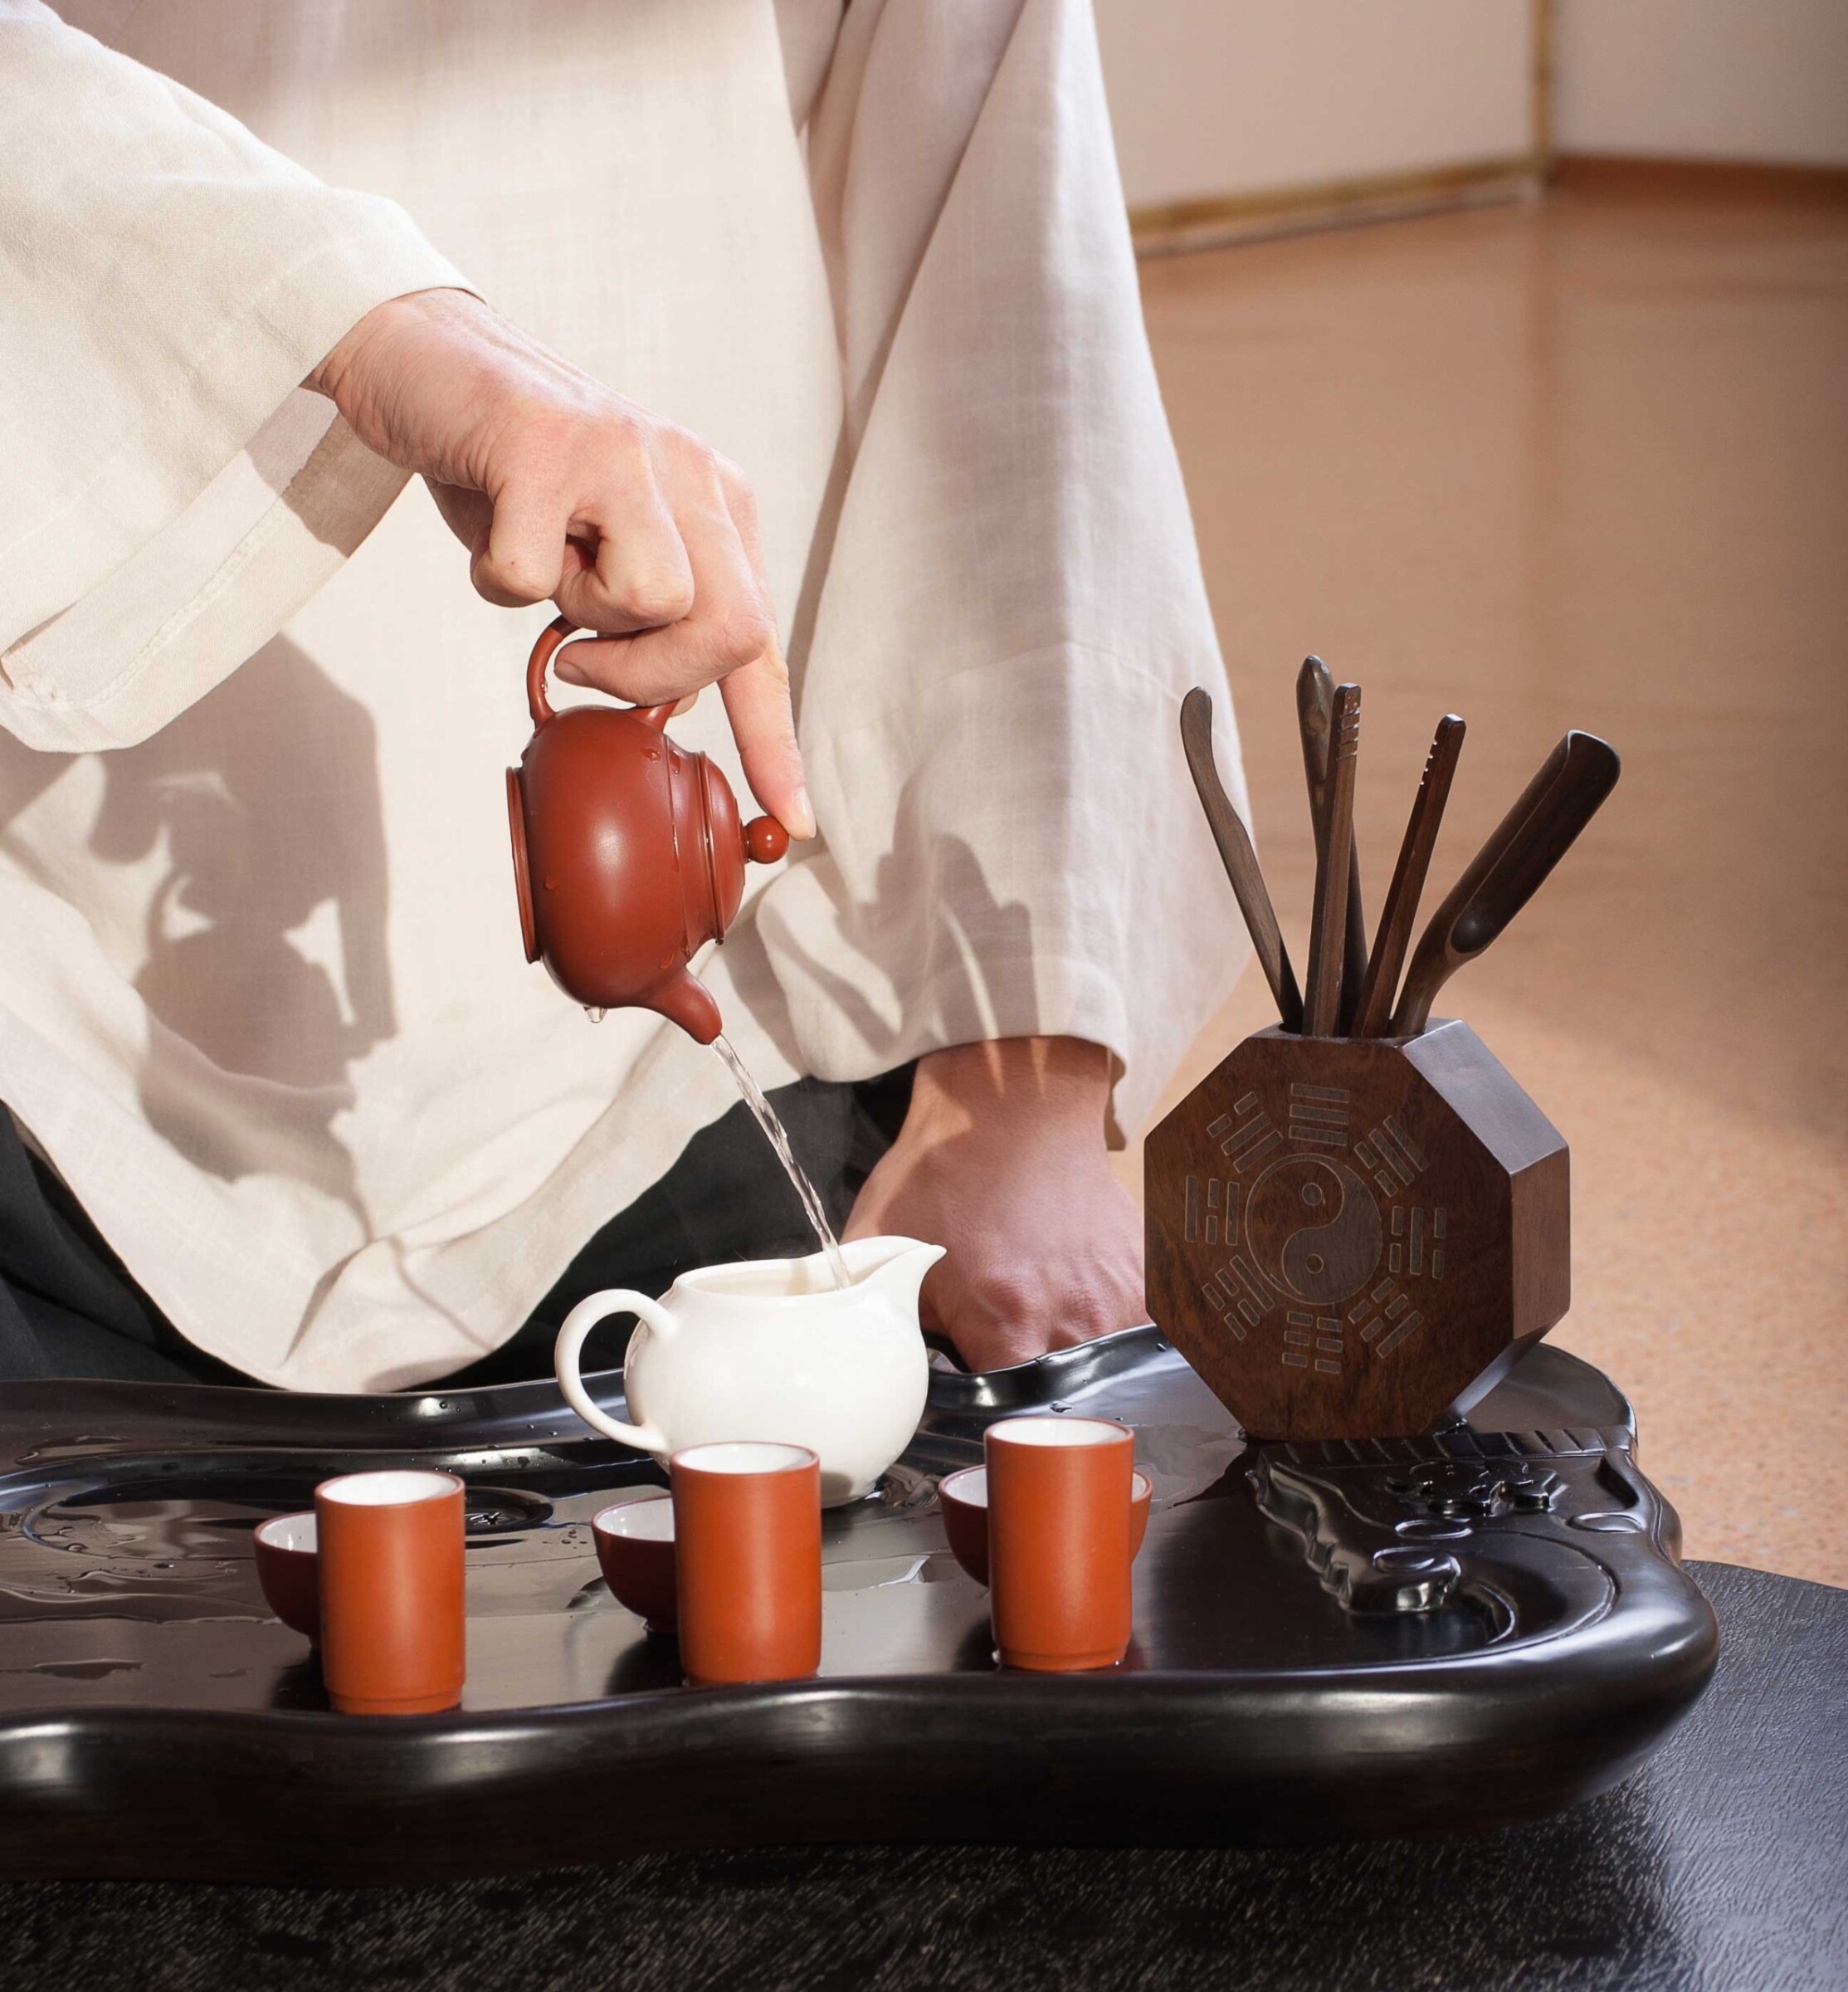 The host prepares the tea according to a very special rite, using the tea utensils in a specially prescribed manner.